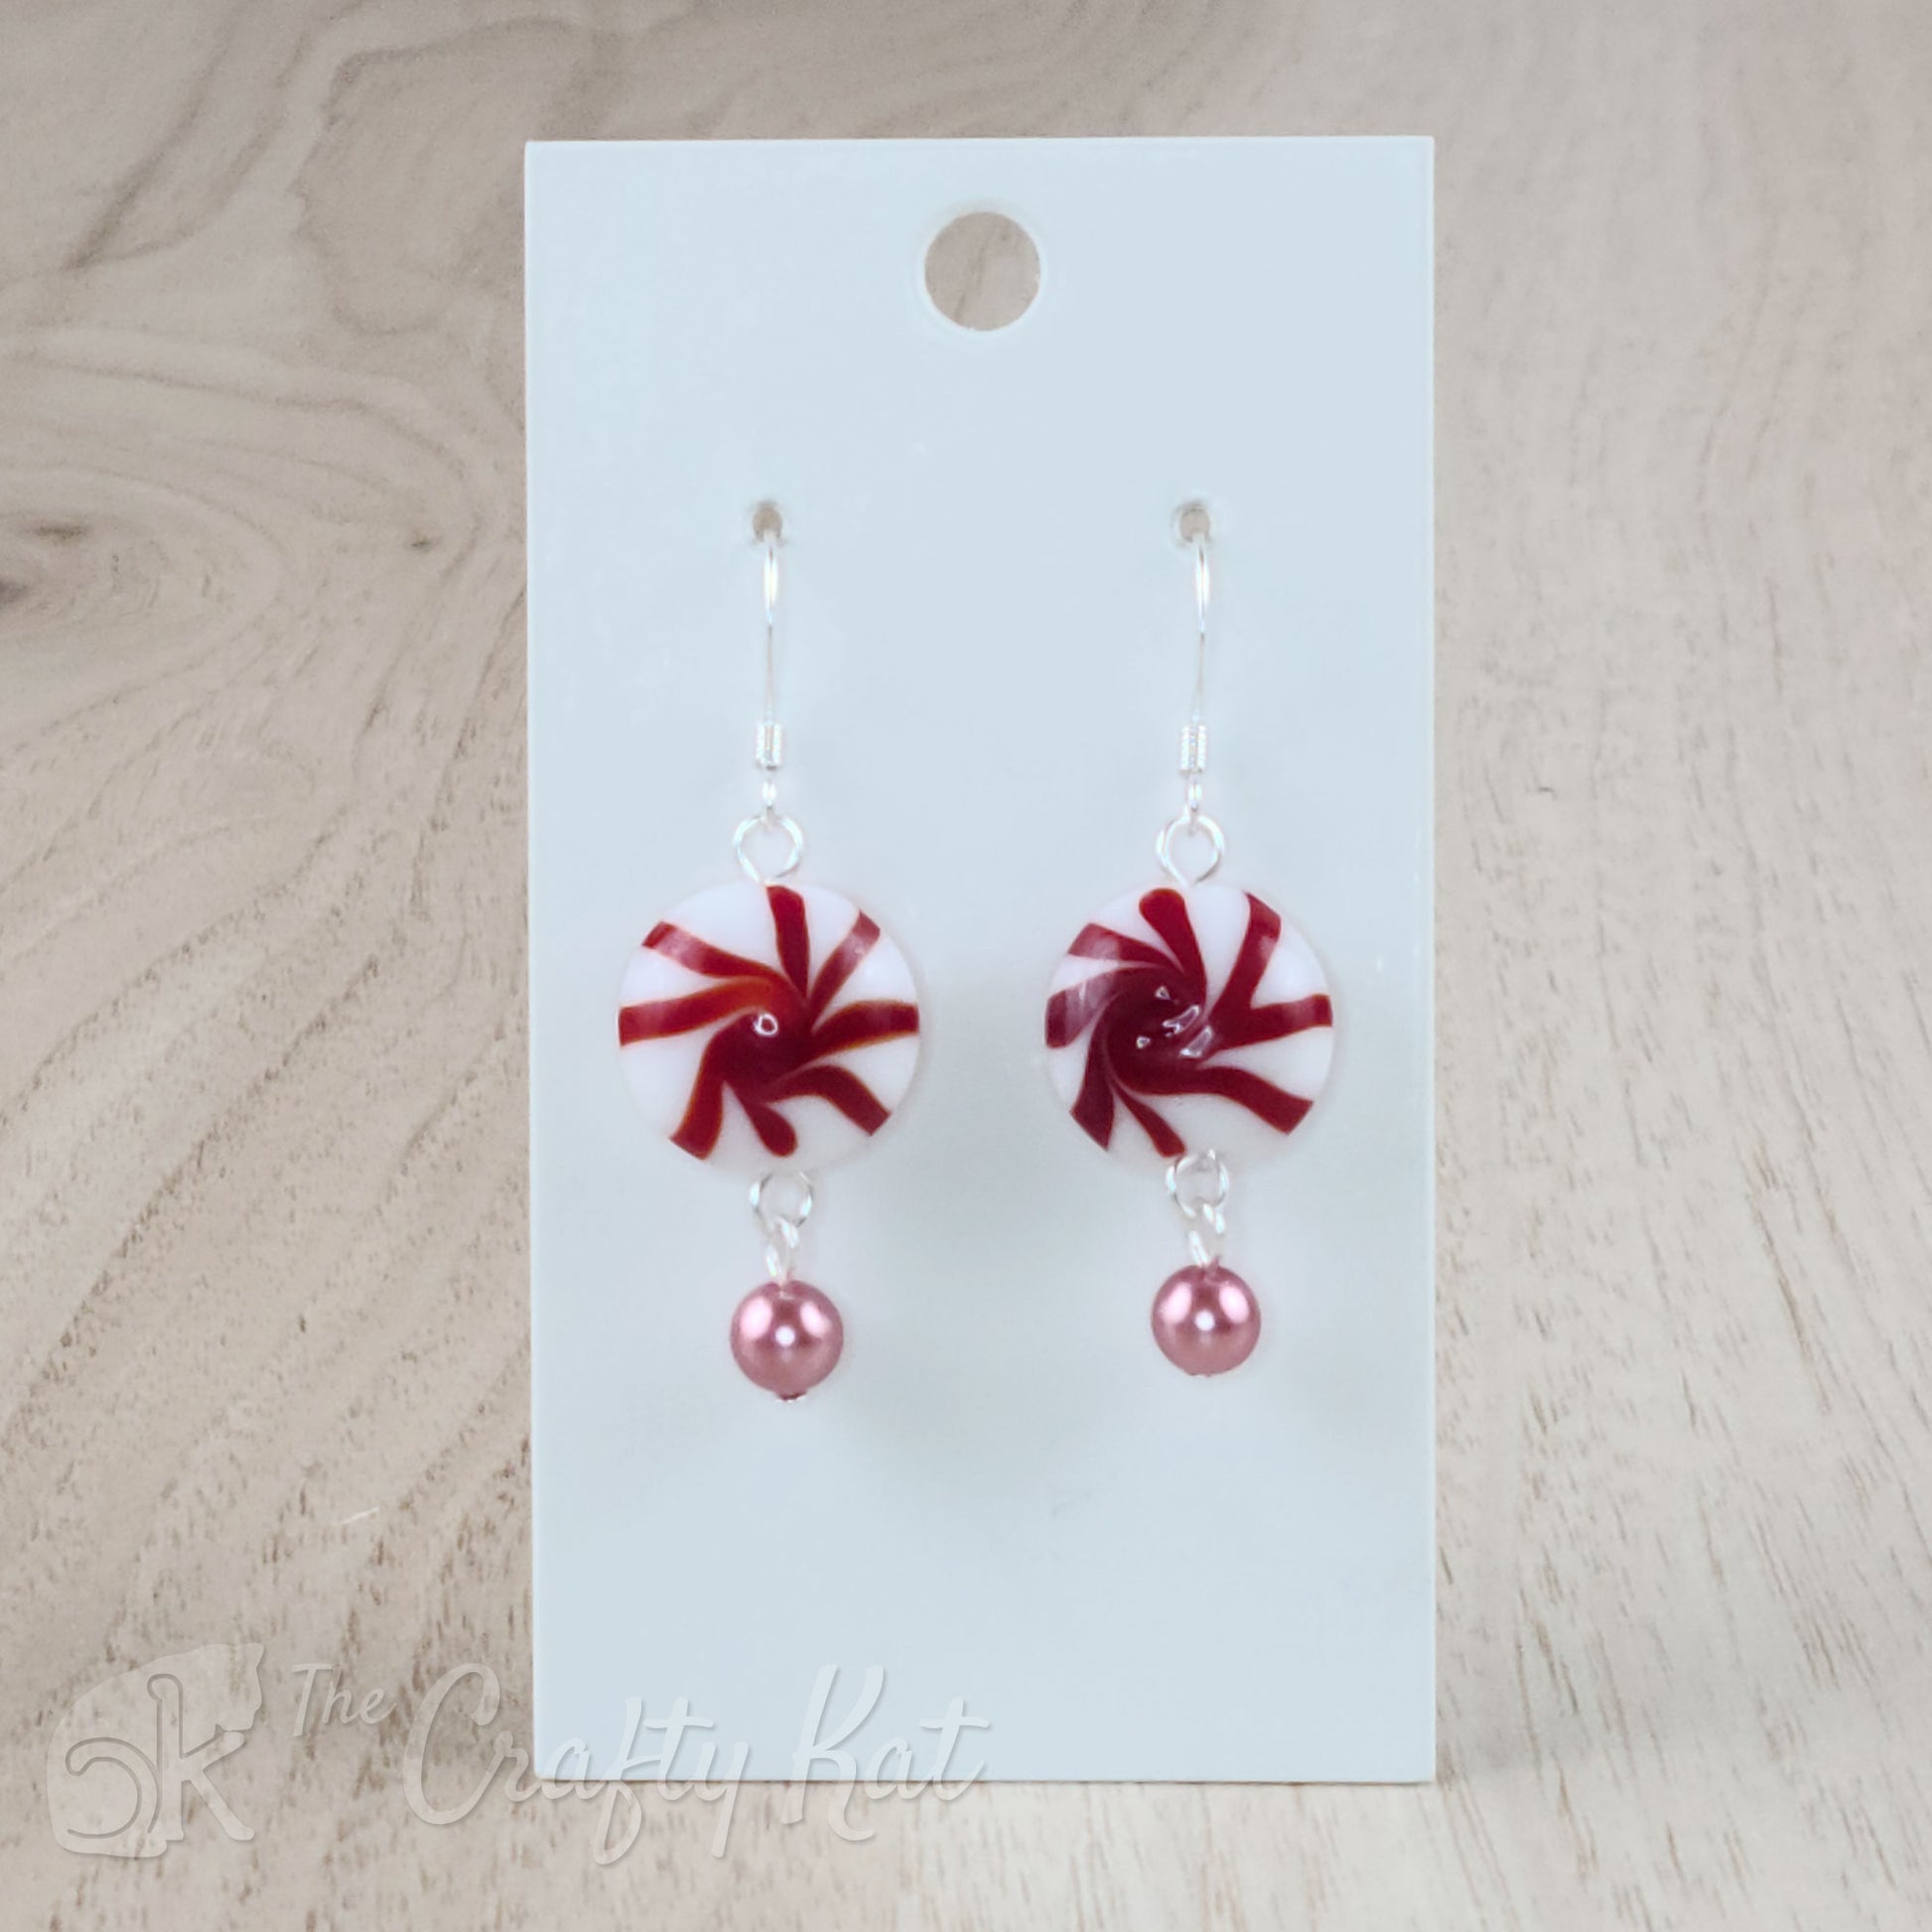 A pair of earrings featuring lampwork glass beads in the shape of classic "starlight" peppermint candies, accented with a pink glass pearl on silver base metal.